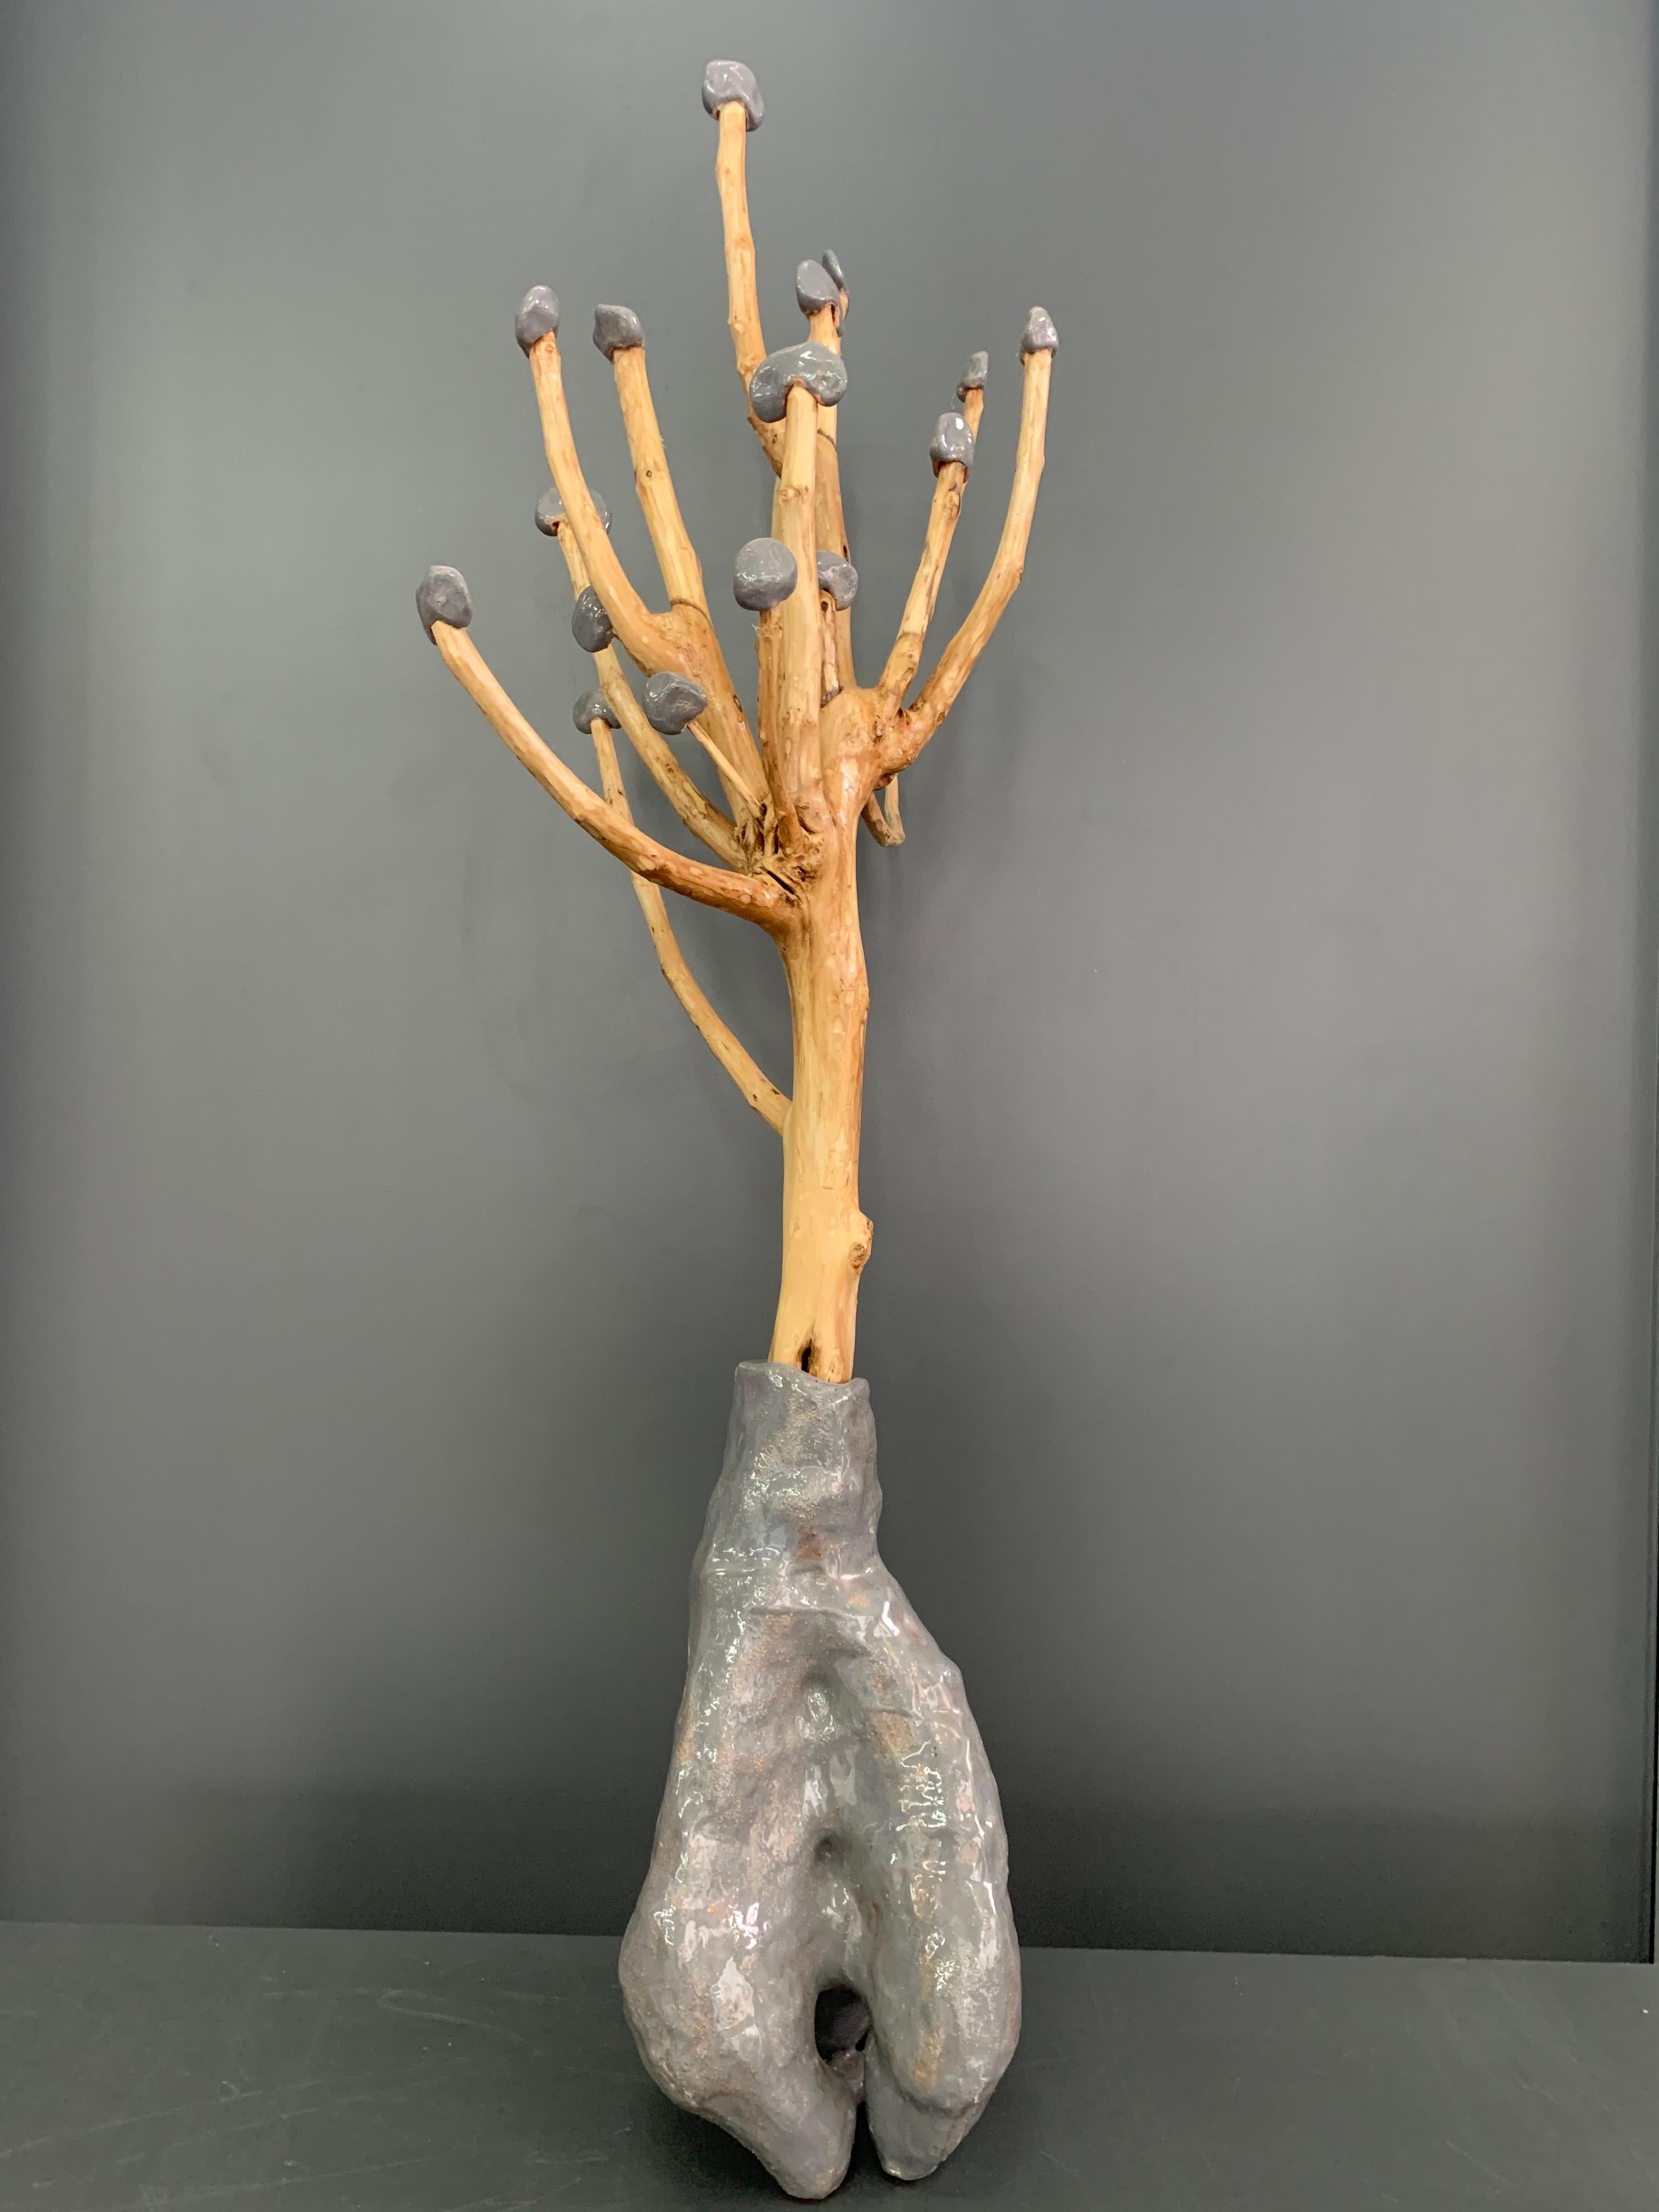 Materials: Manual molding, chamotte, glazing, wood

In this series, I give the pruned or broken branches a second breath, a second life to the tree, only in sculpture.